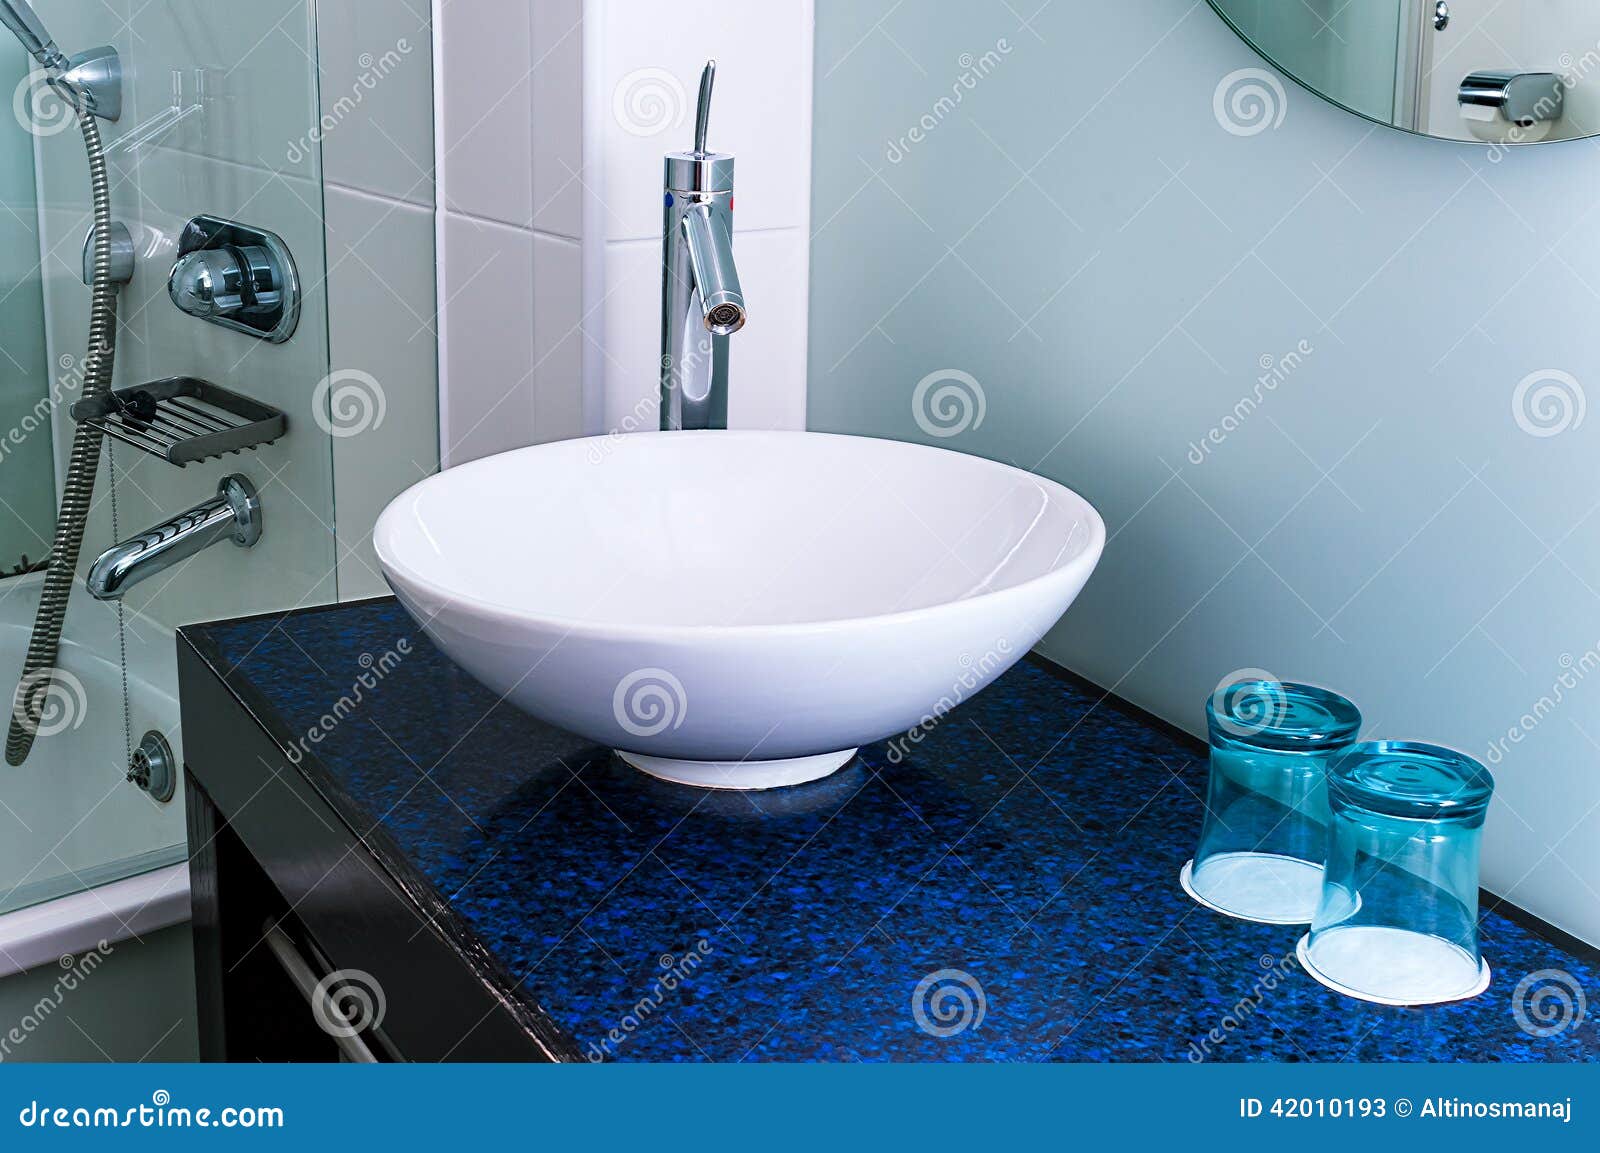 Bathroom Sink Counter Tap Mixer Glass Blue Stock Image Image Of Counter